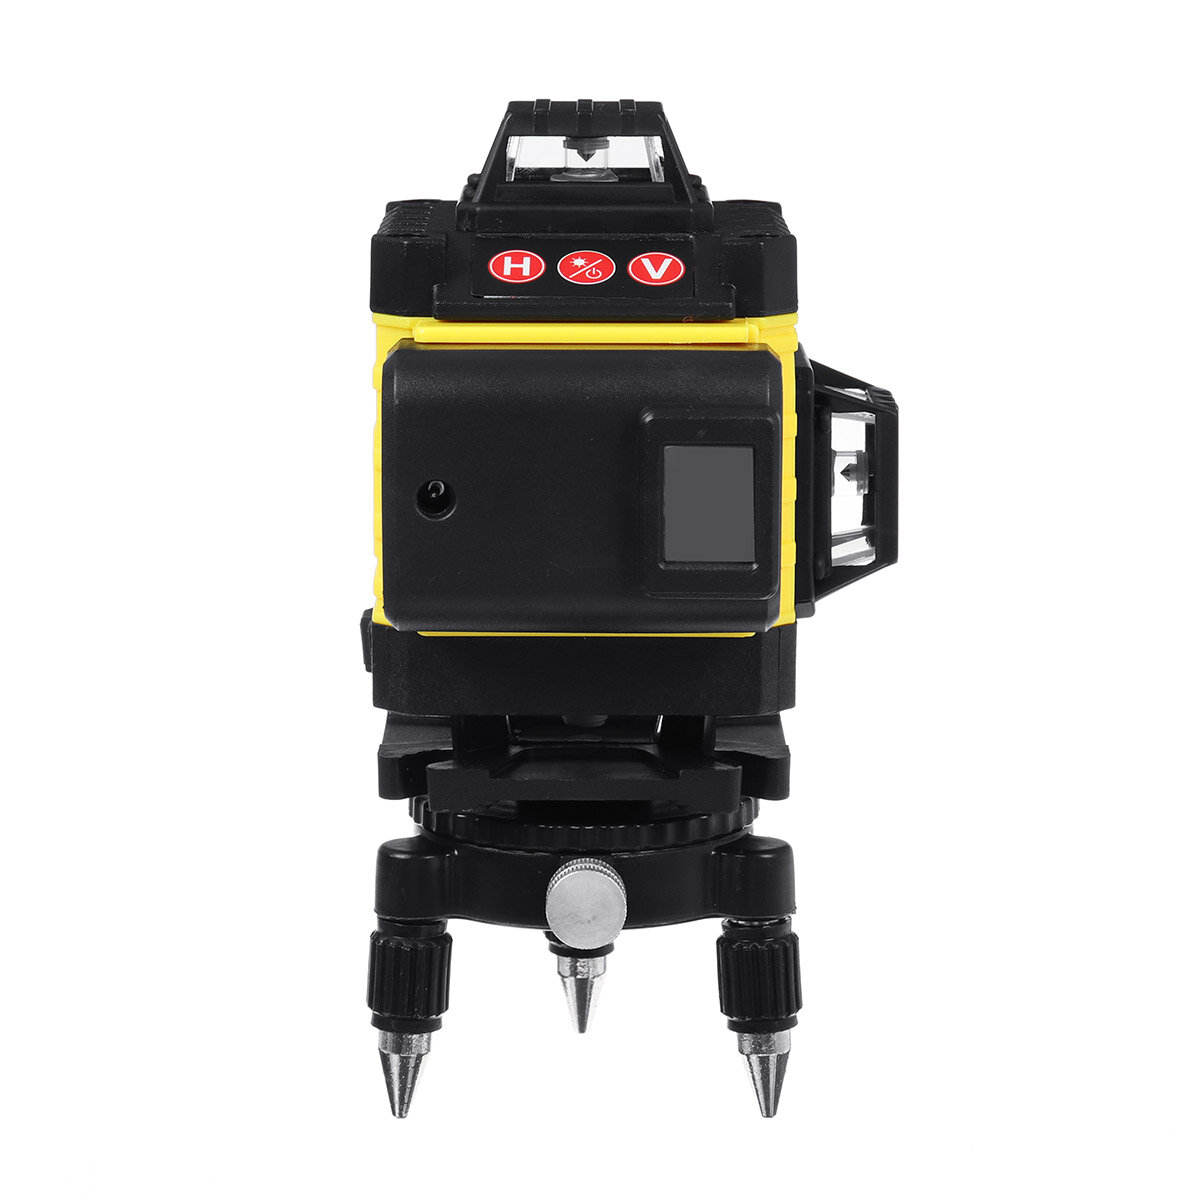 

12/16 Line 4D Laser Level Green Light Digital Self Leveling 360° Rotary Measure with 6000mah Battery